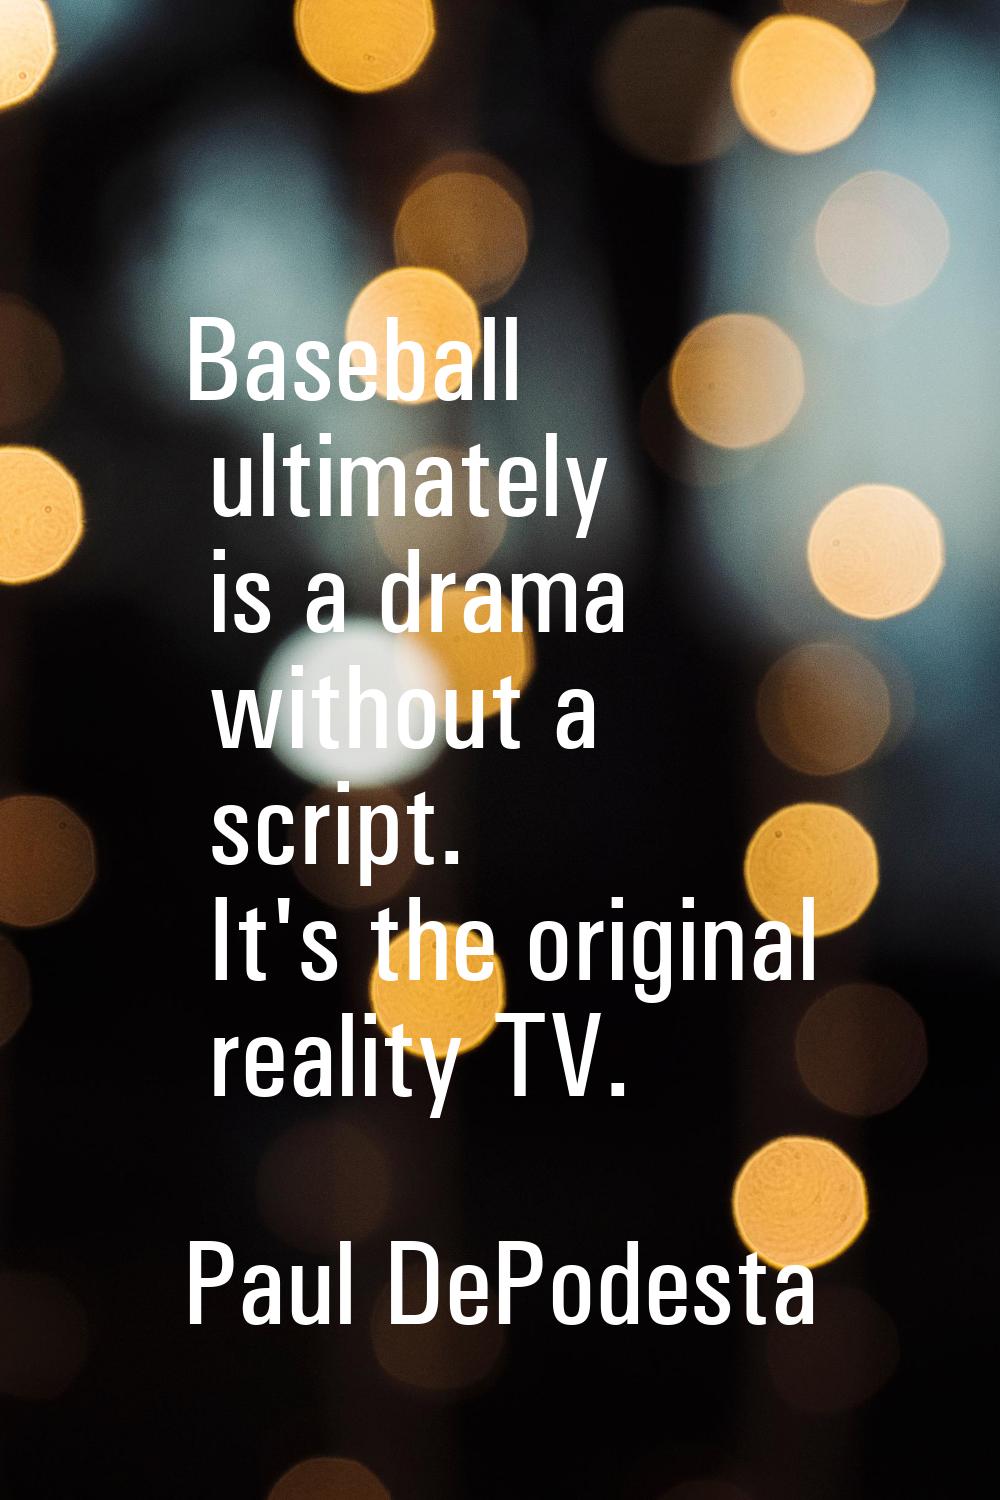 Baseball ultimately is a drama without a script. It's the original reality TV.